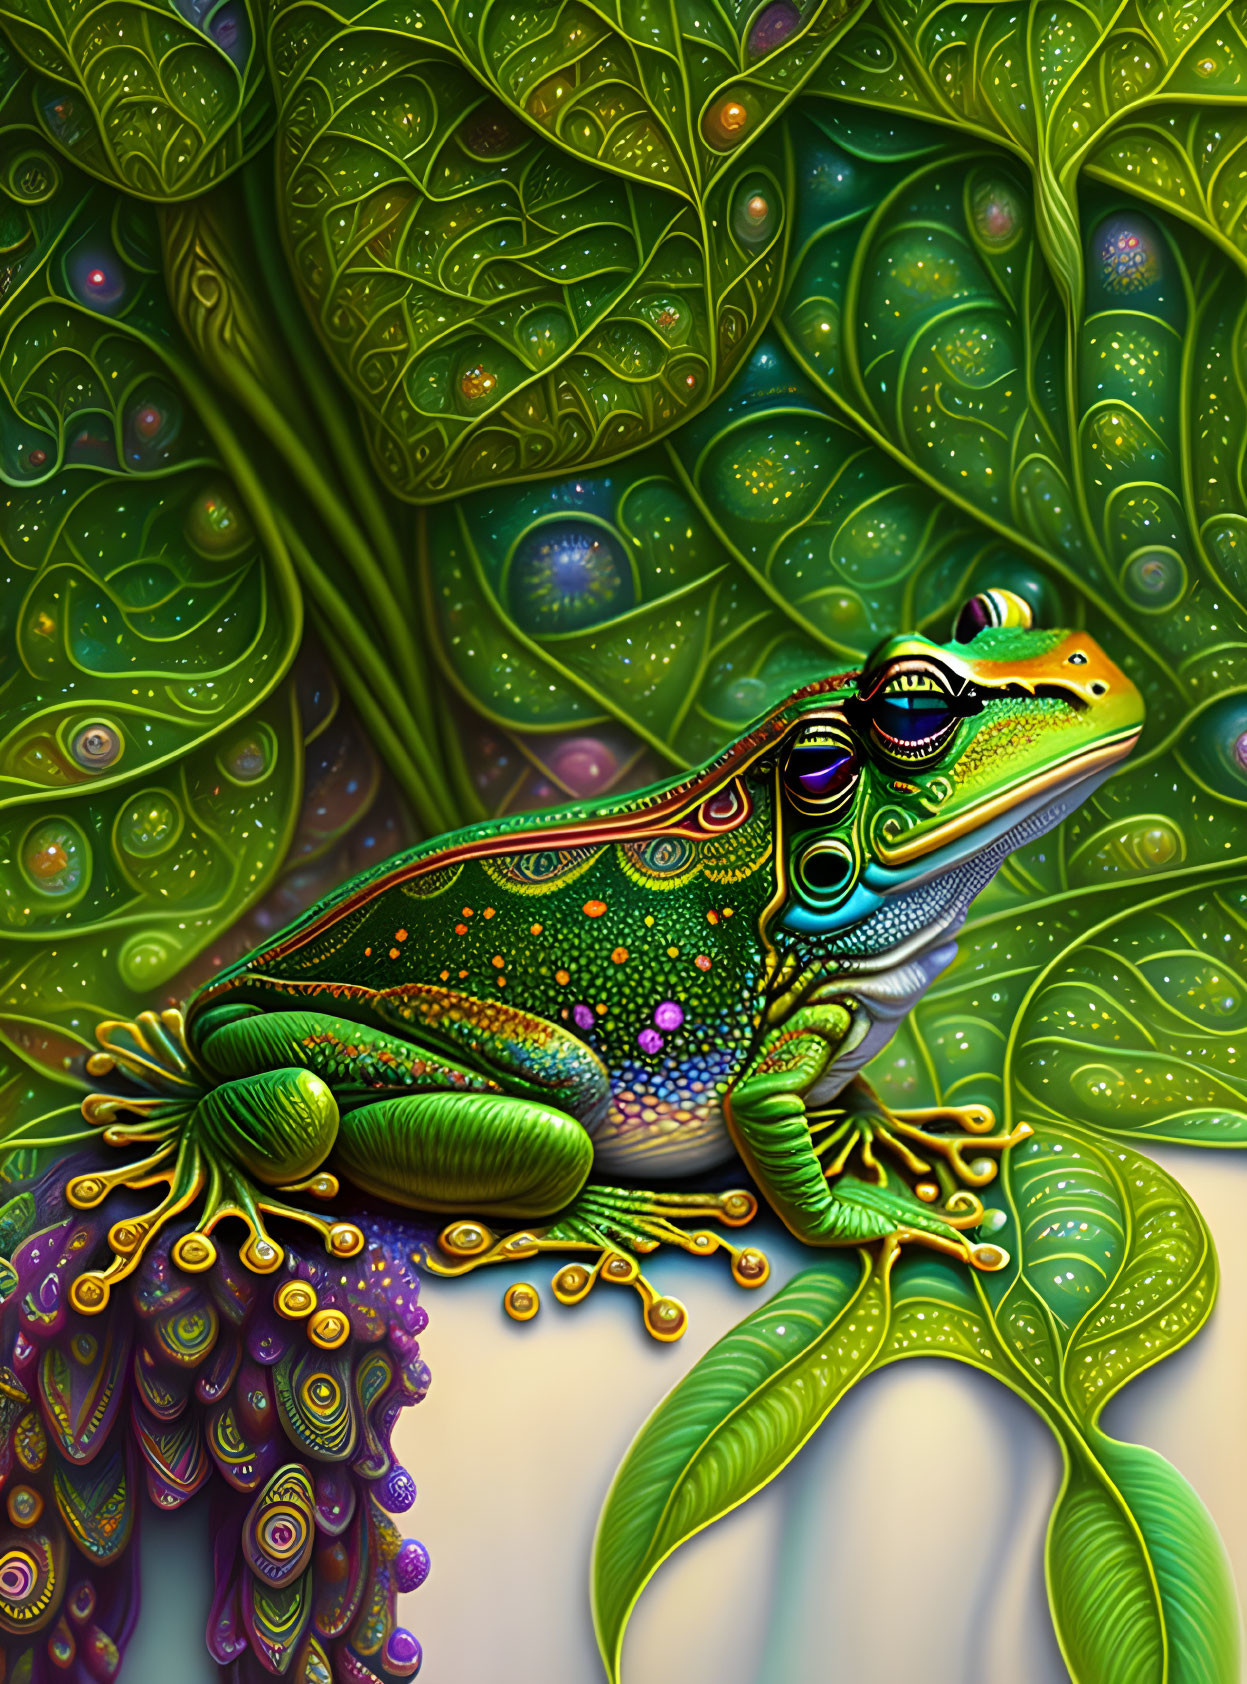 Colorful Frog Illustration Perched on Leaf with Whimsical Patterns